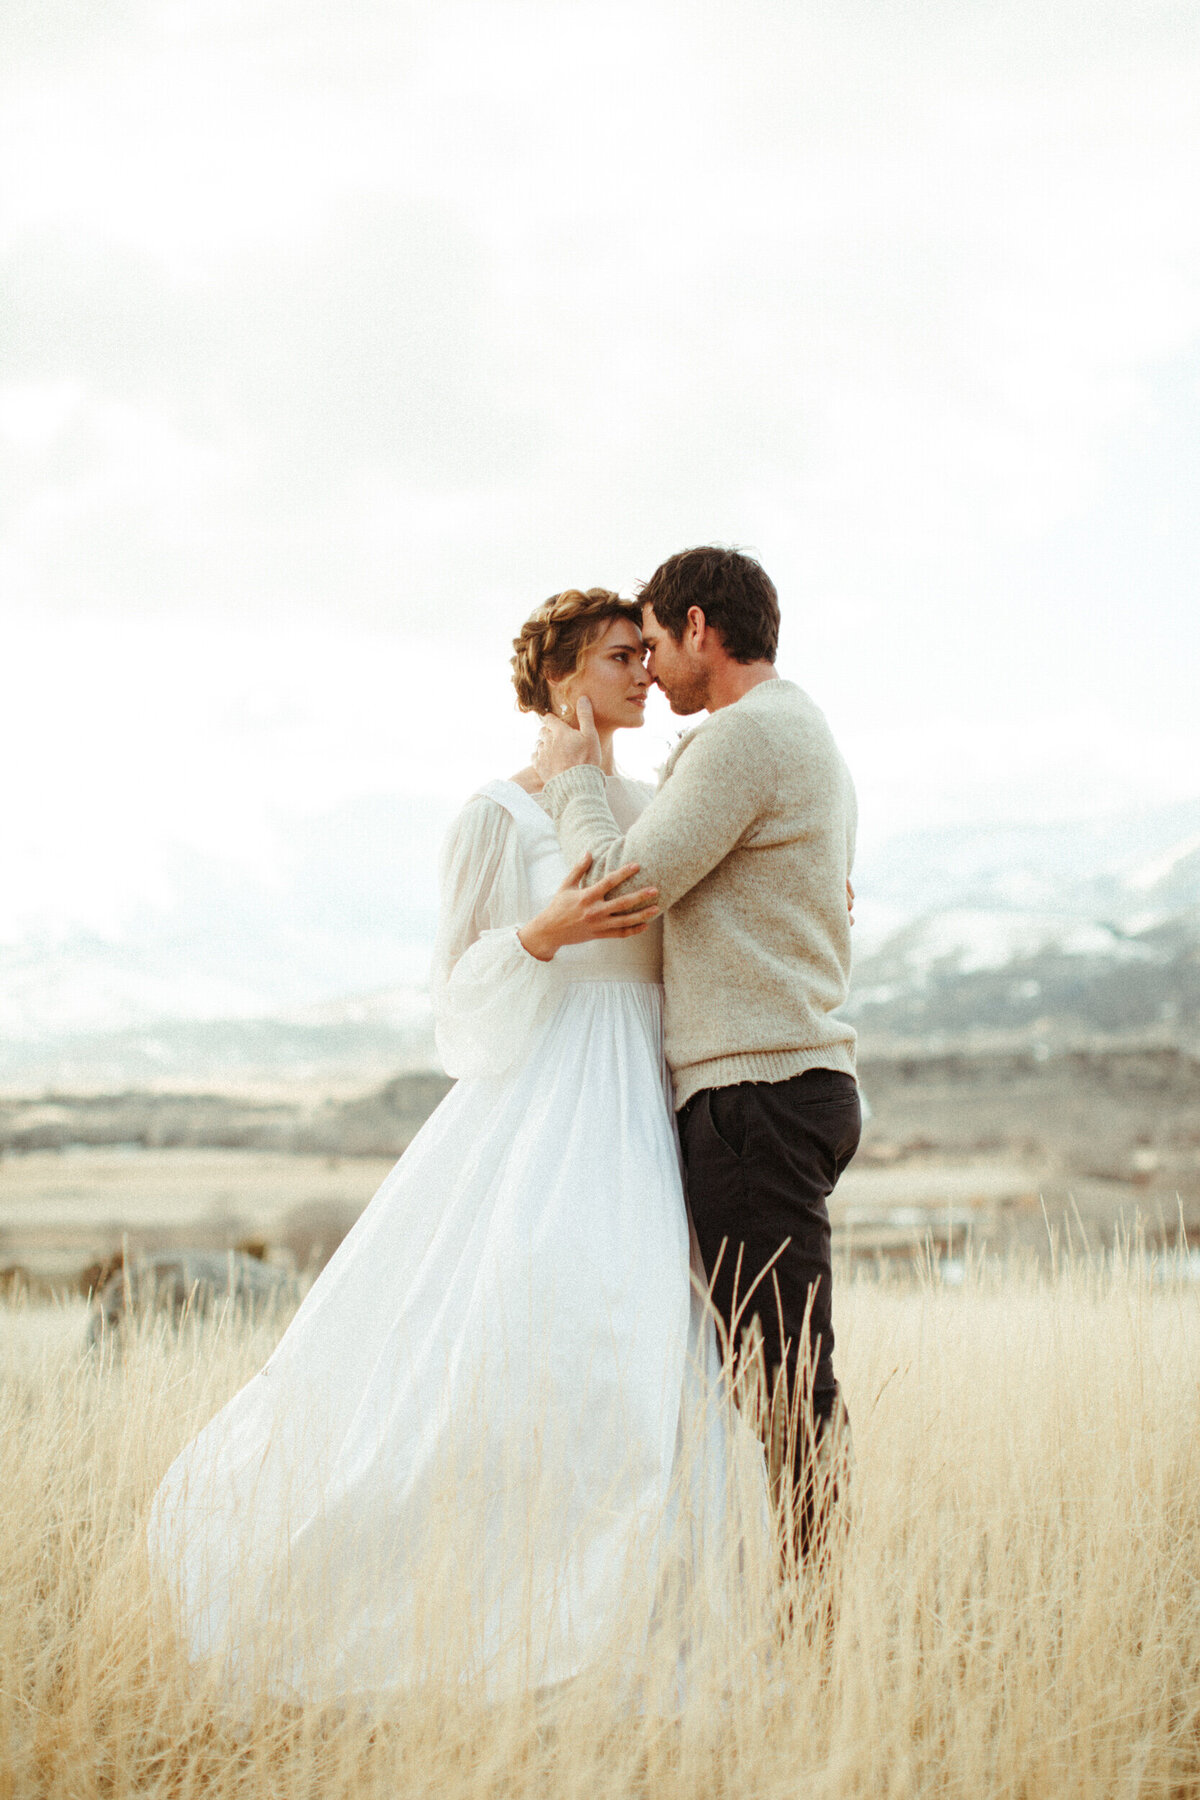 Boho bride with braided updo embracing her groom in a field during their winter elopement